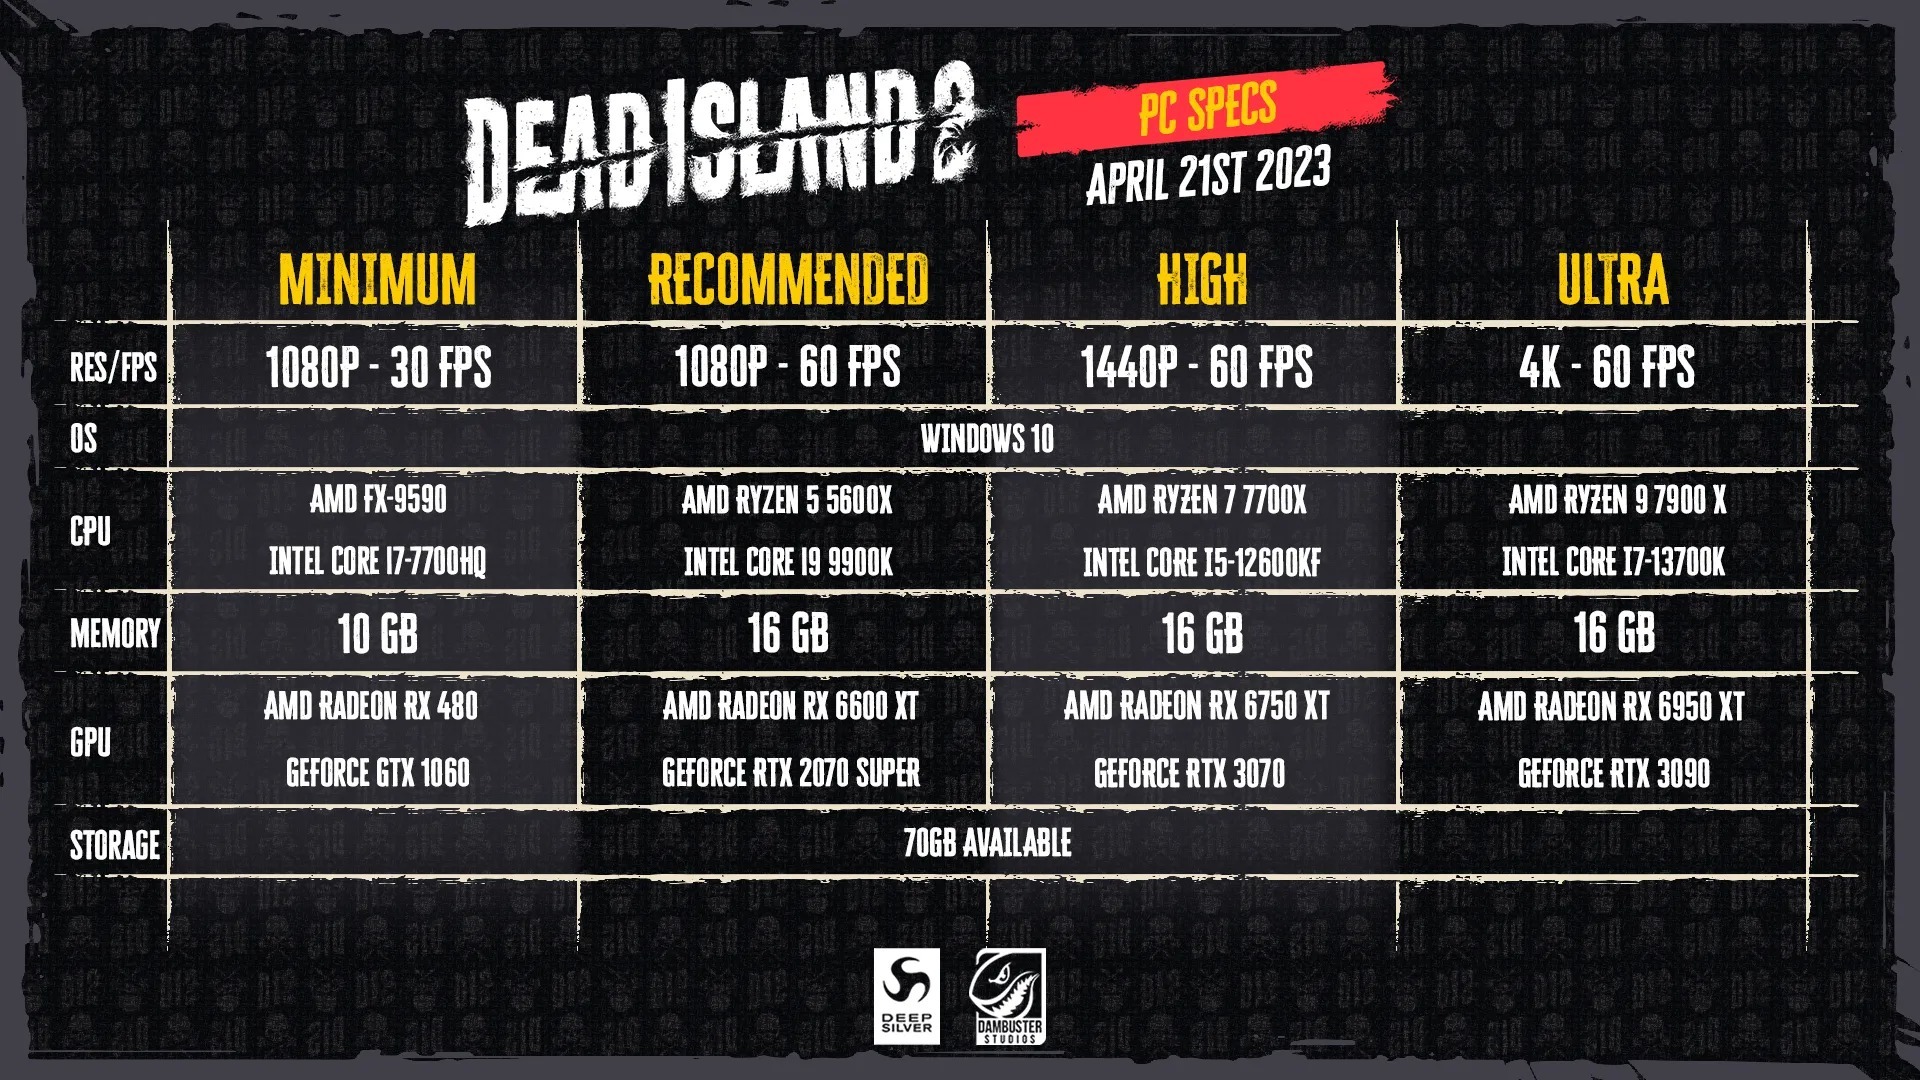 Dead Island 2 PC Specs: Here's What You Need To Know